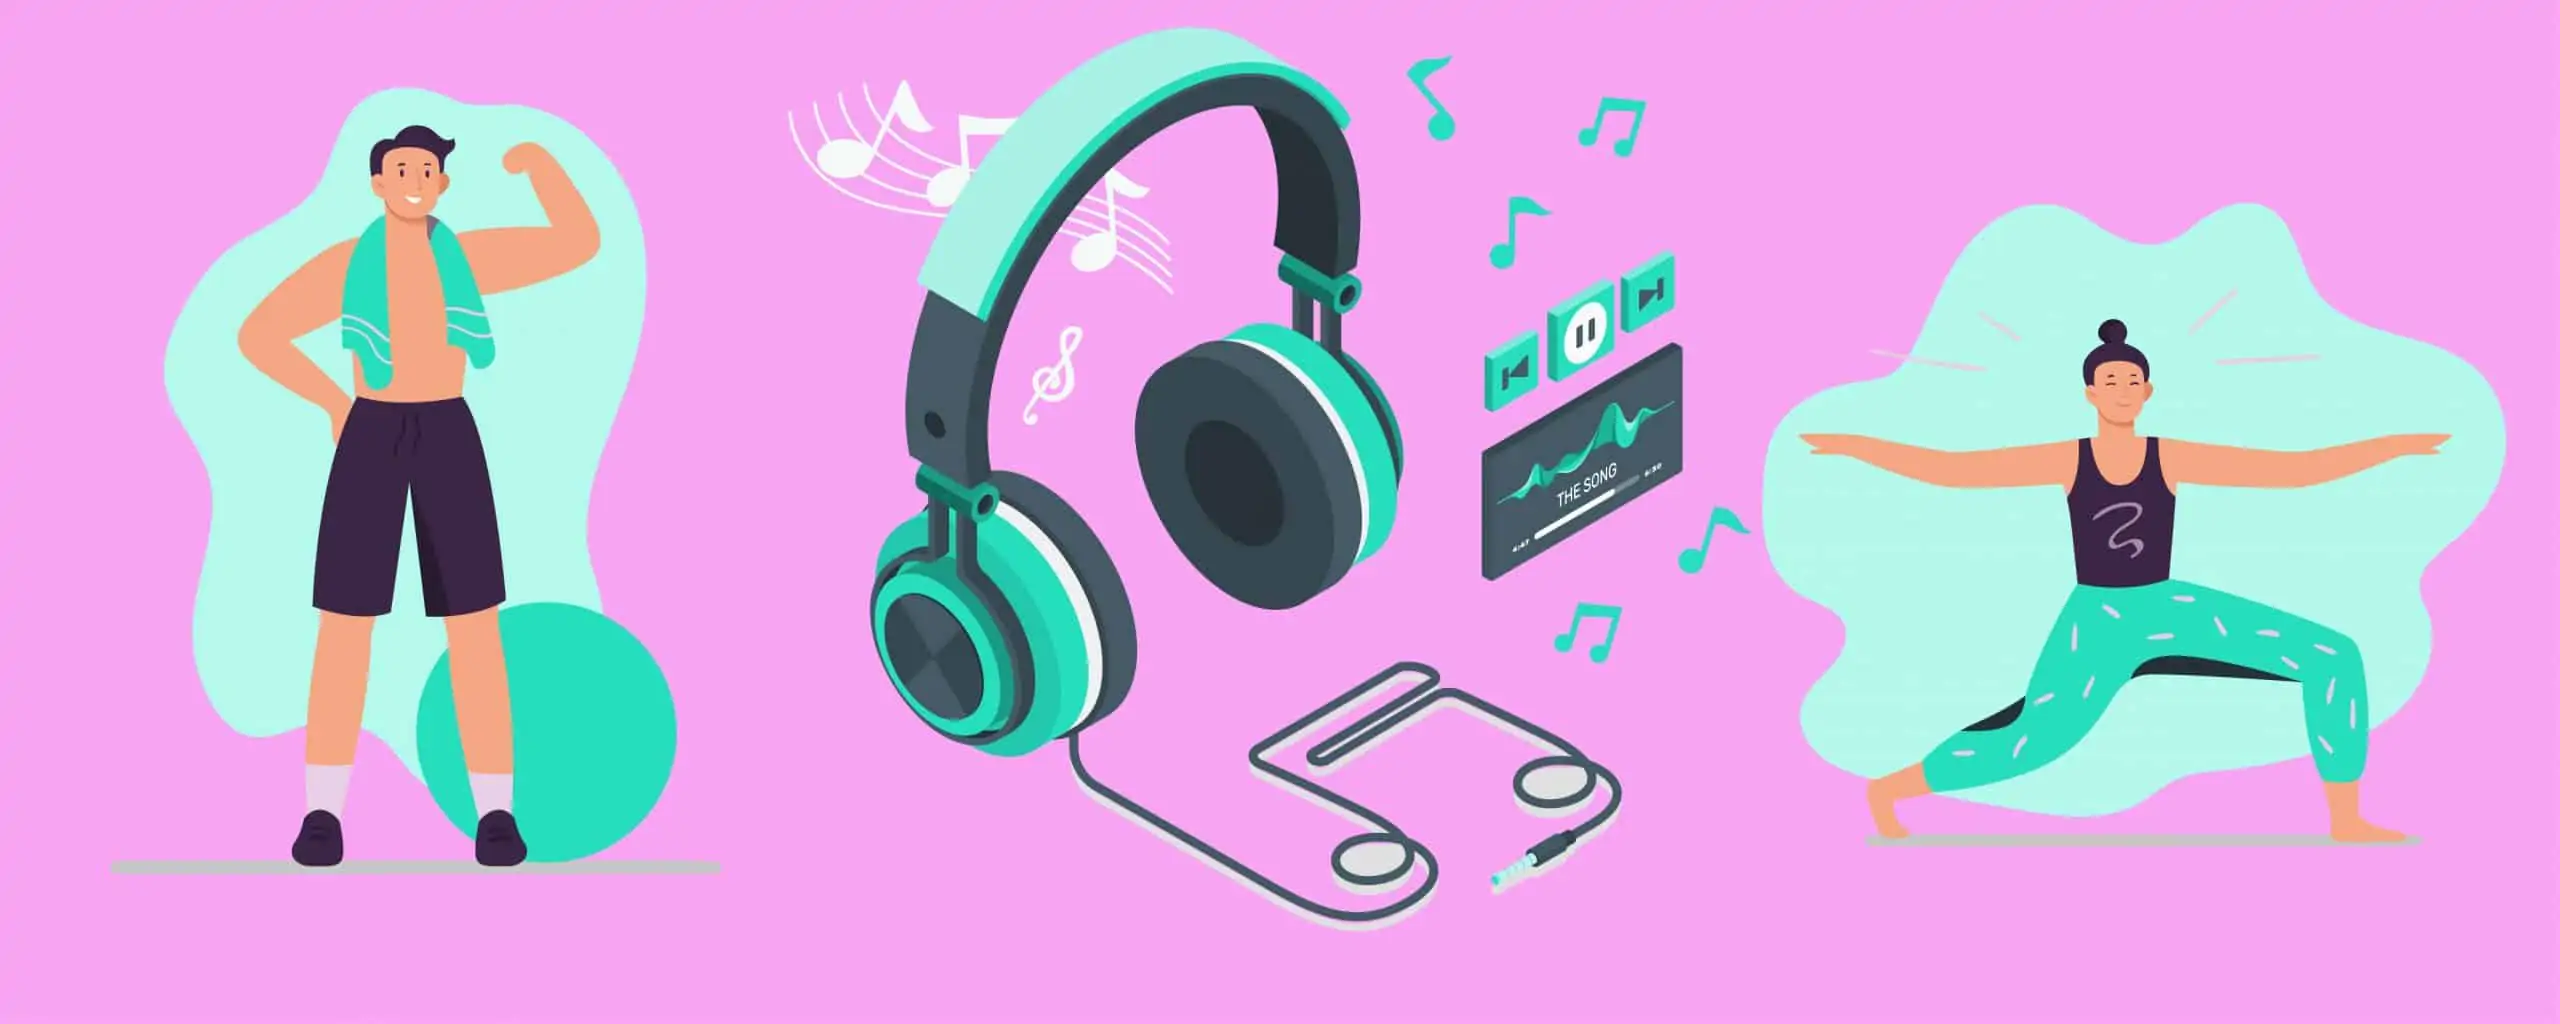 How Can Music Help Your Health